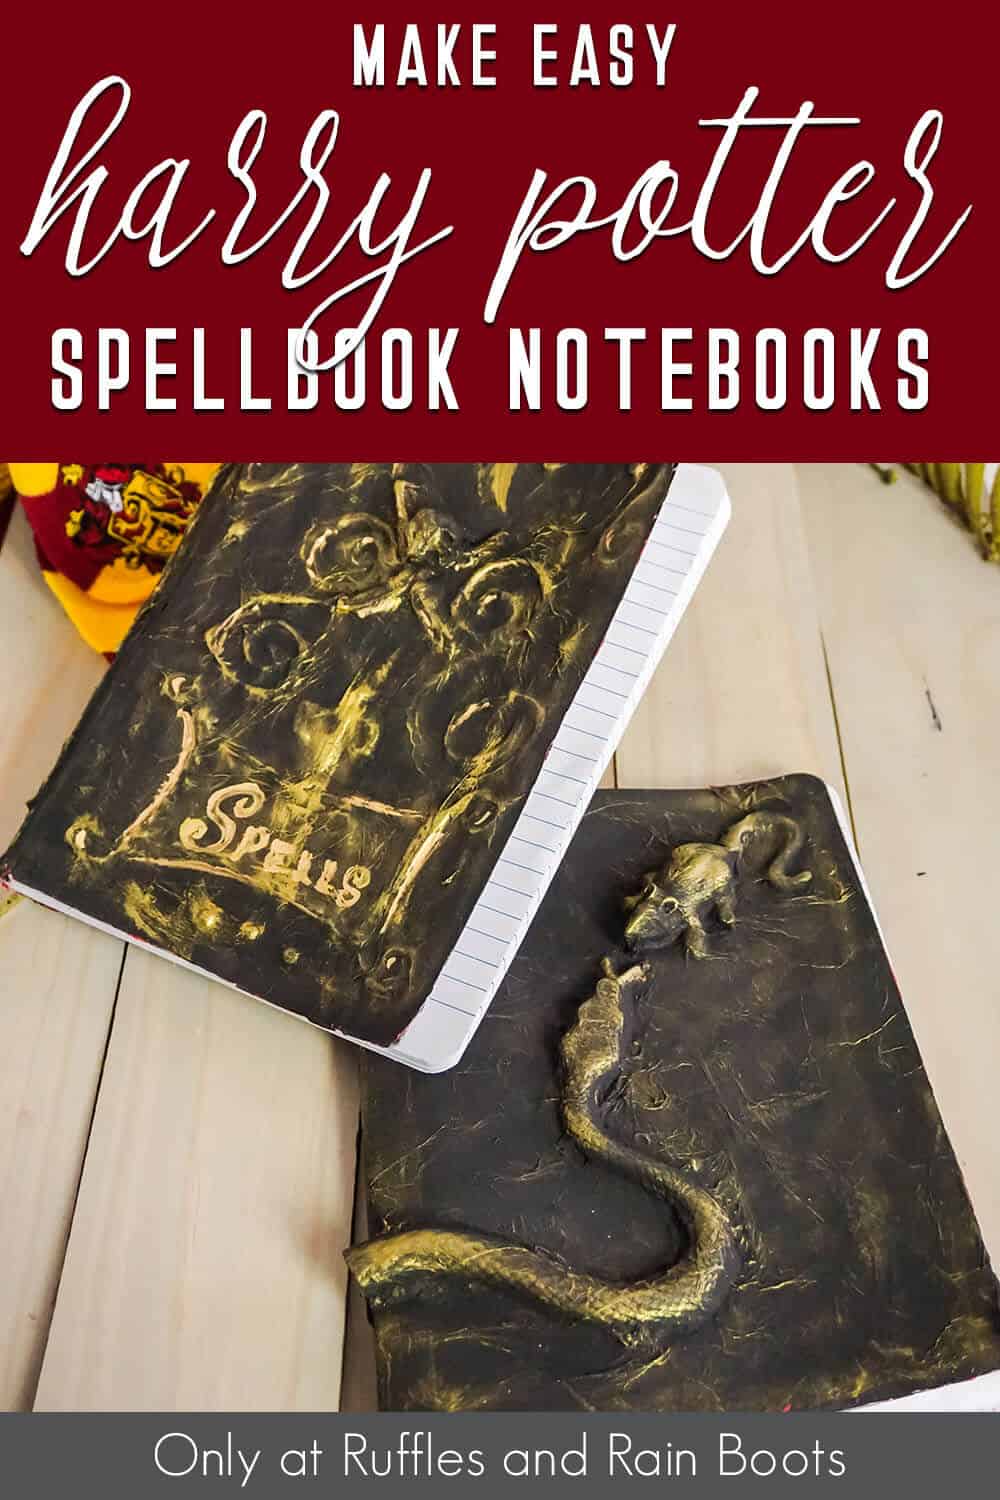 easy way to make wizard spell books for harry potter with text which reads make easy harry potter spellbook notebooks